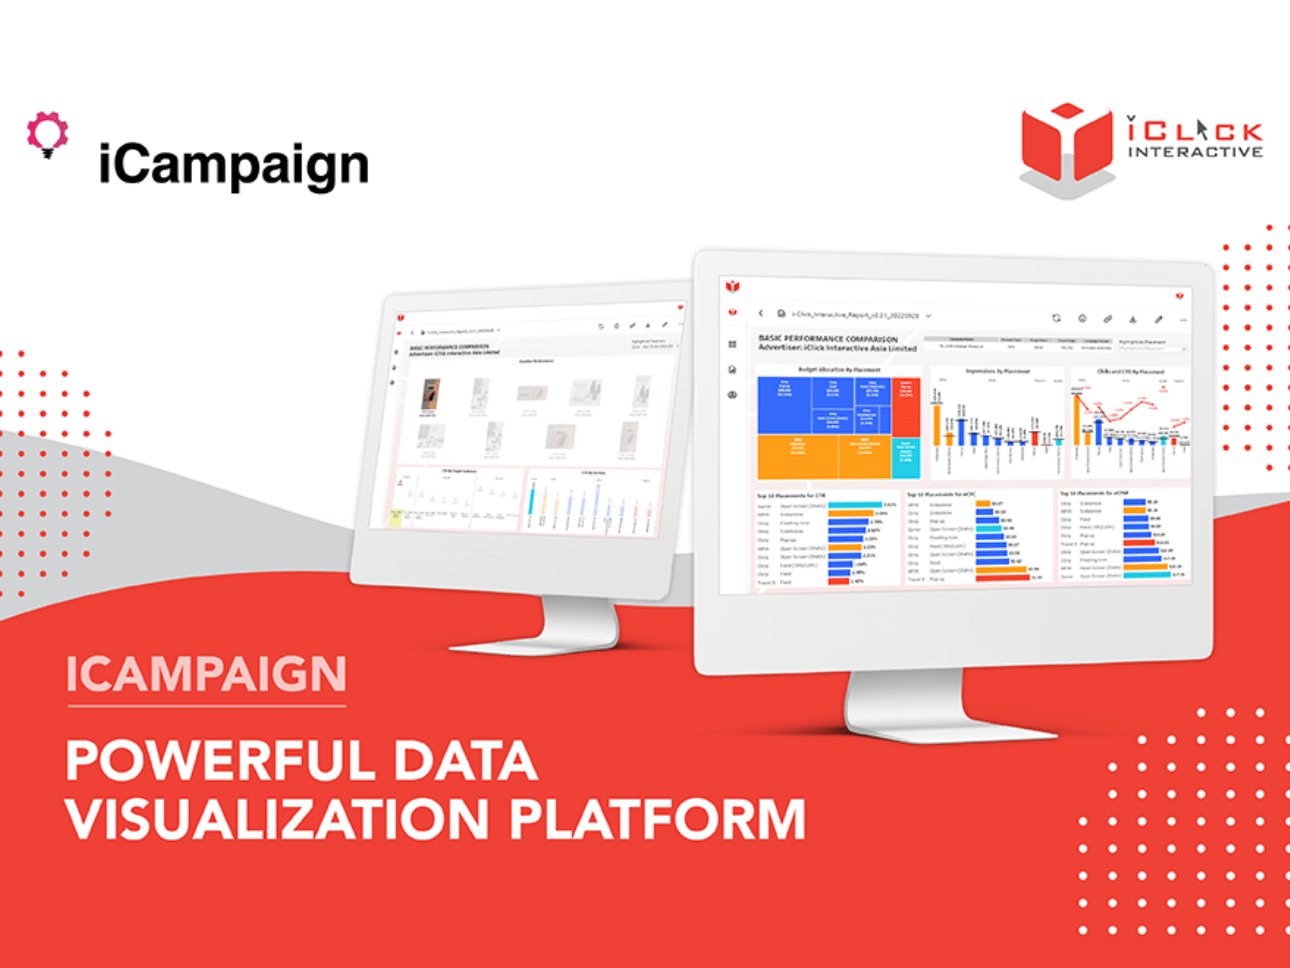 Launch of iCampaign – Powerful Data Visualization Platform￼